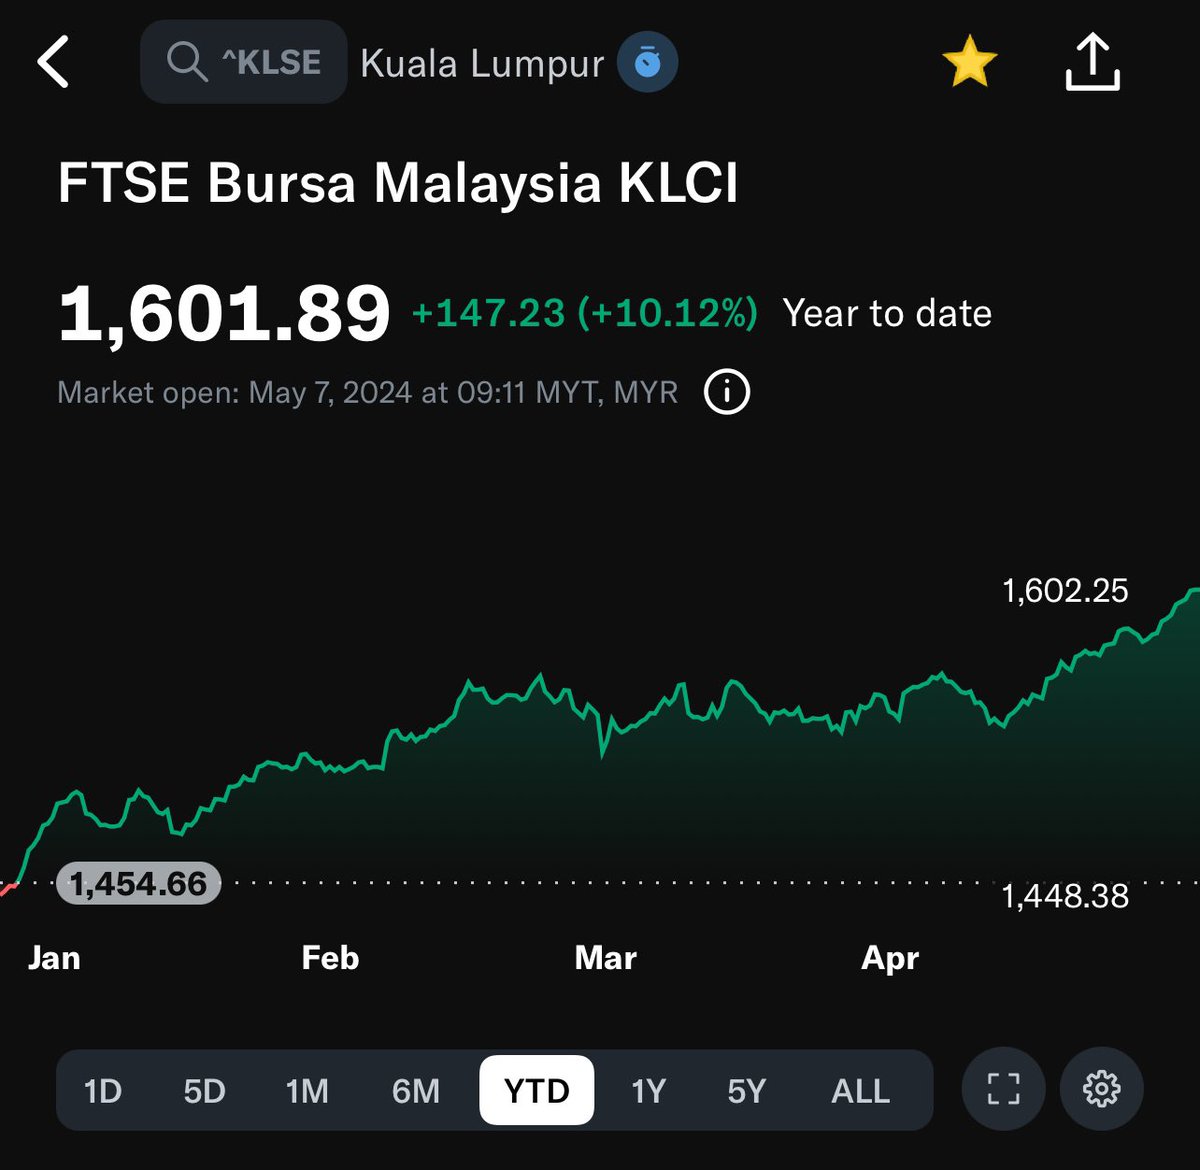 Bursa Malaysia crossed the 1,600 mark this morning as the market has been rallying in the past week. MIDF reported that the week ended last week saw stronger net buying by foreign investors with net inflows surging 3.6 times to RM1.06 billion.